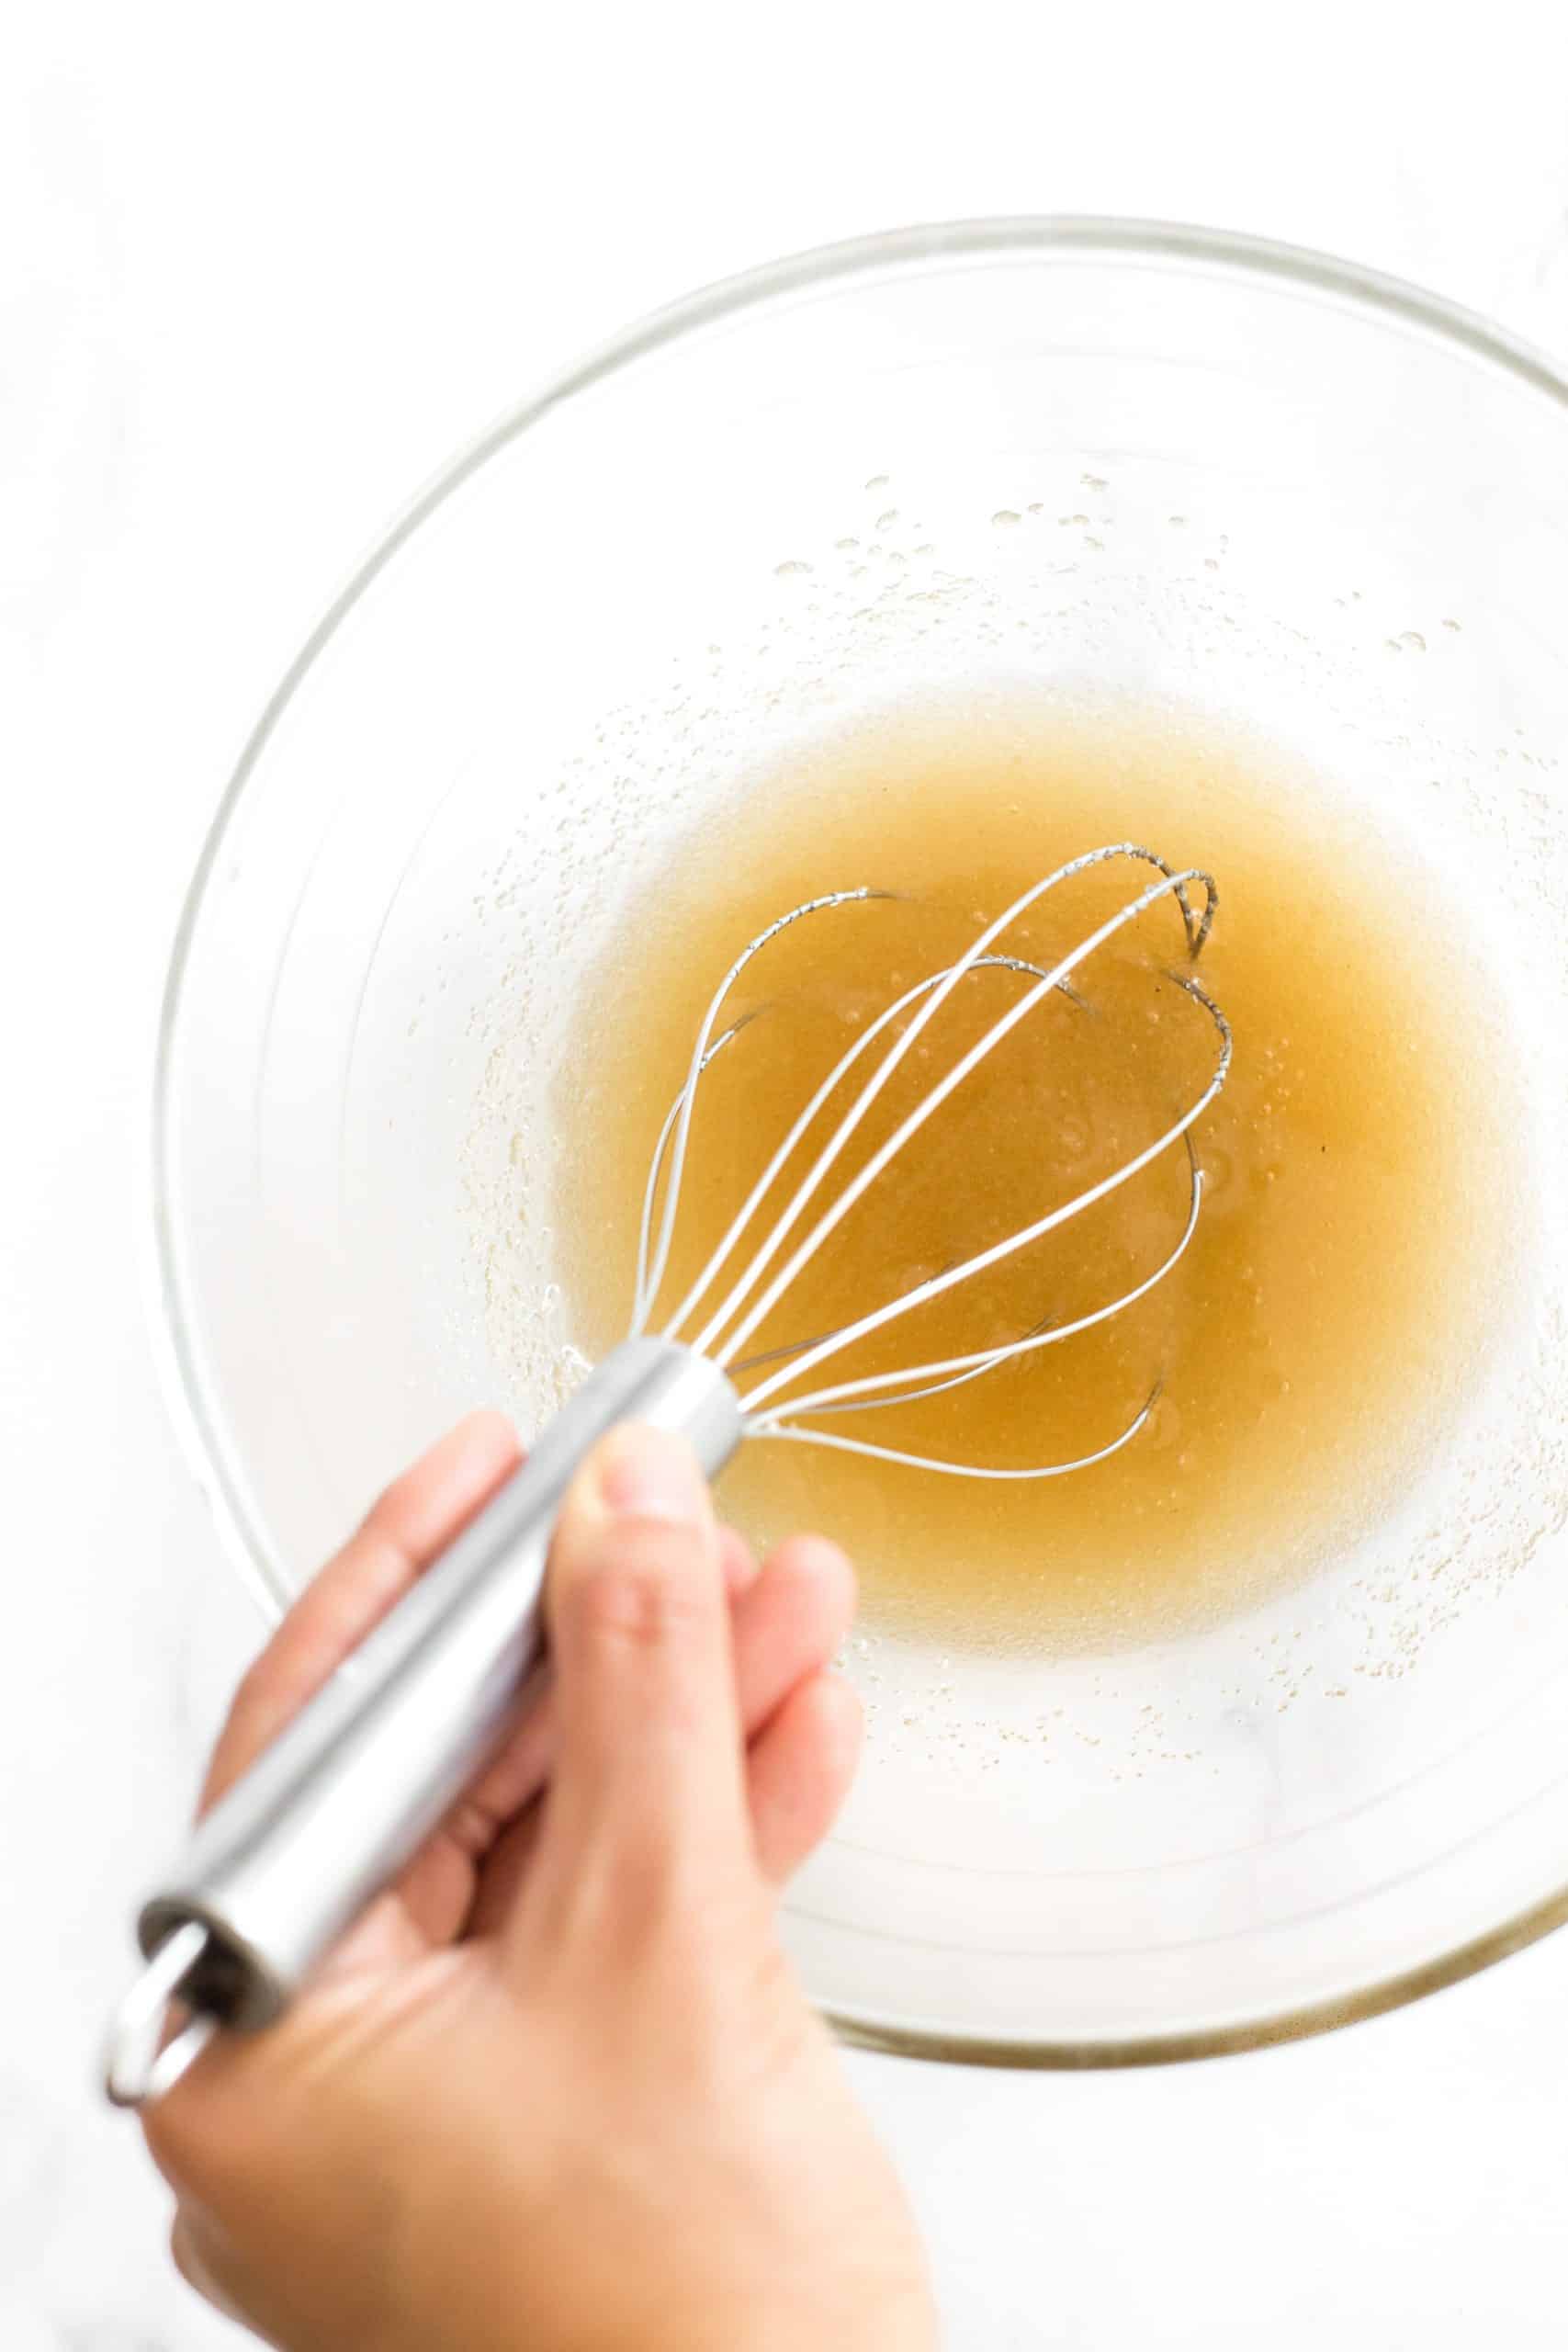 Creaming sugar and oil in a glass mixing bowl.